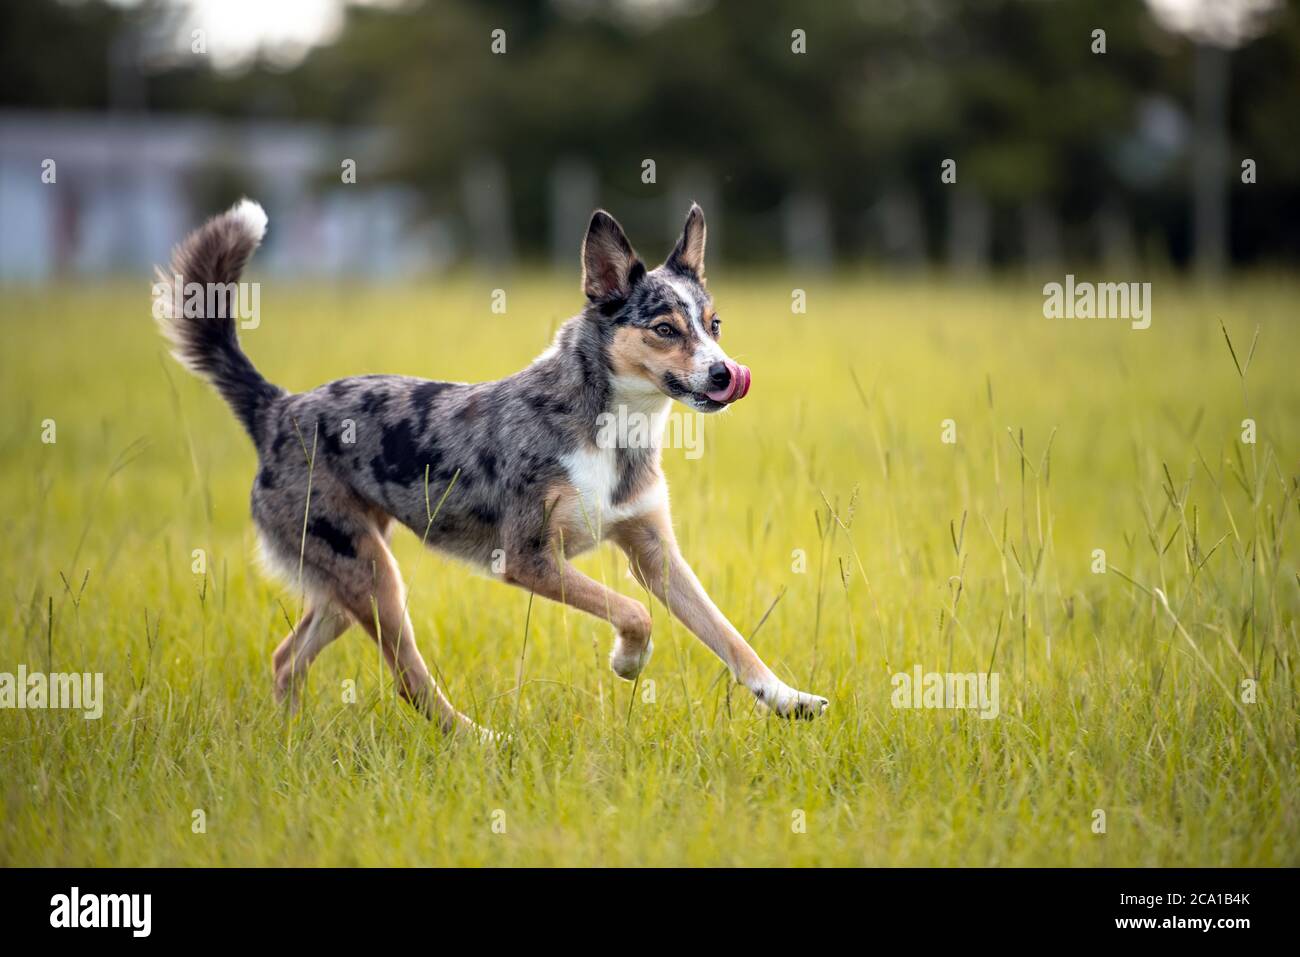 Original Breed High Resolution Stock Photography and Images - Alamy